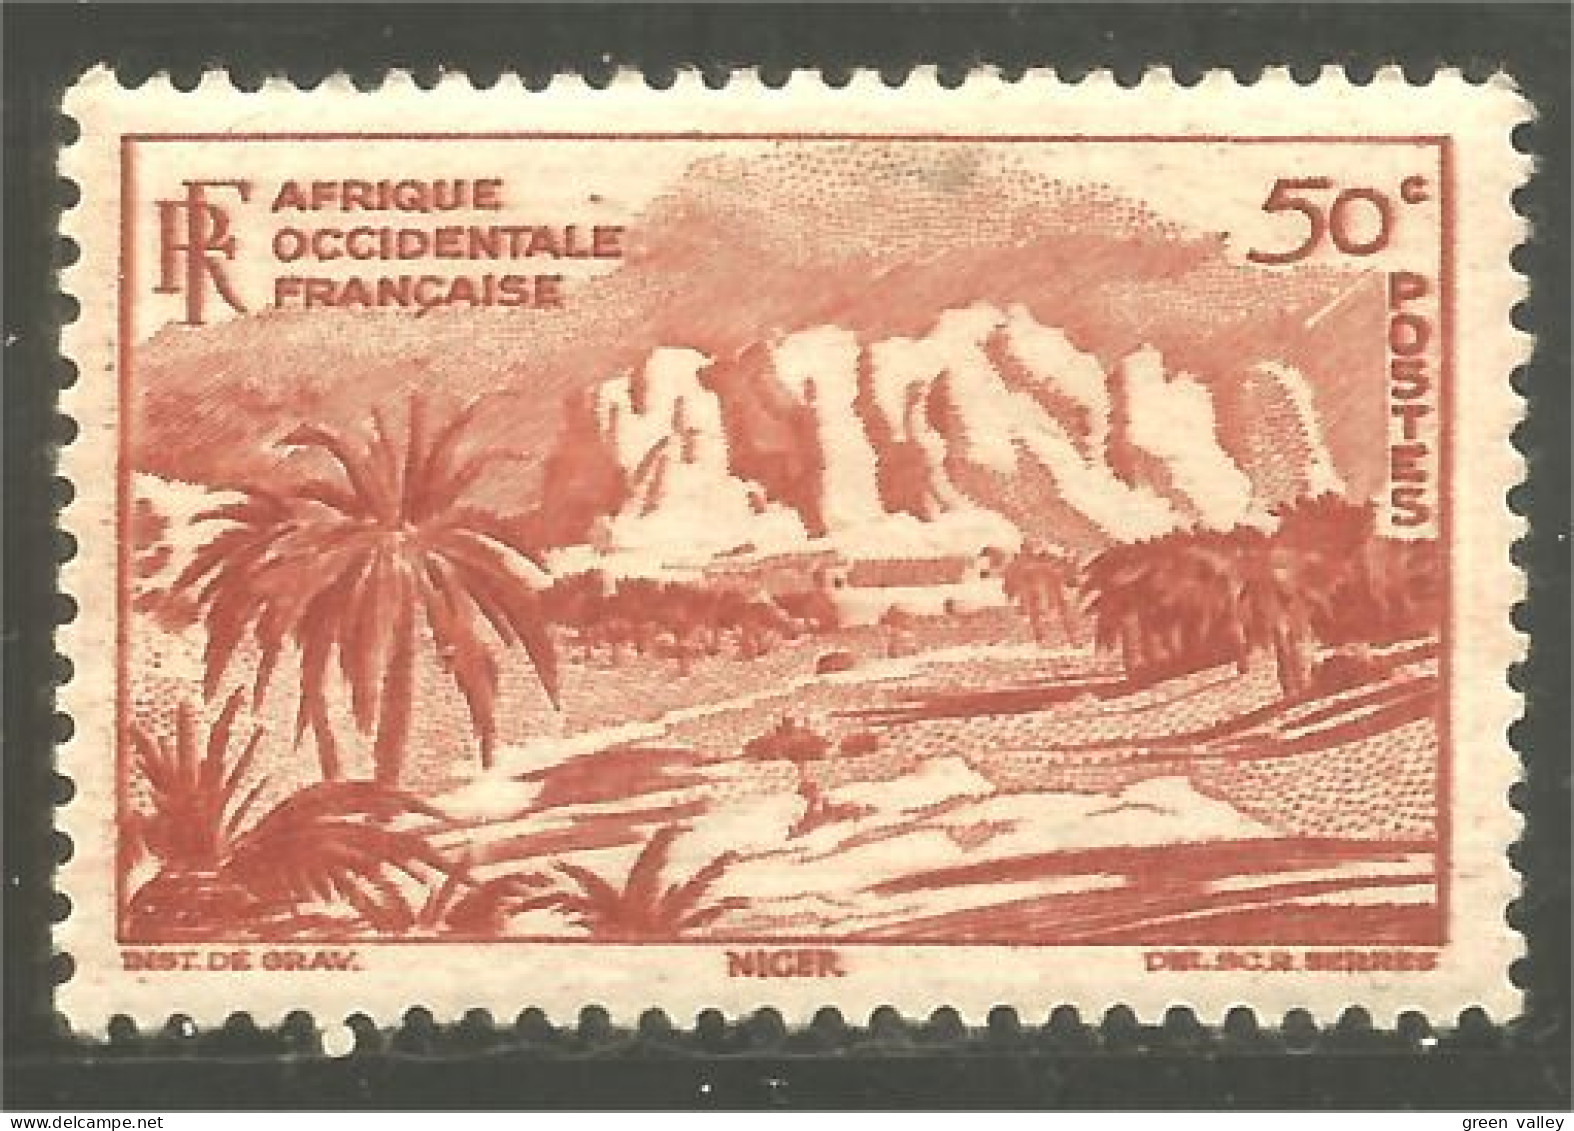 372 AOF Montagnes Niger Mountains MH * Neuf (f3-AEF-387) - Neufs